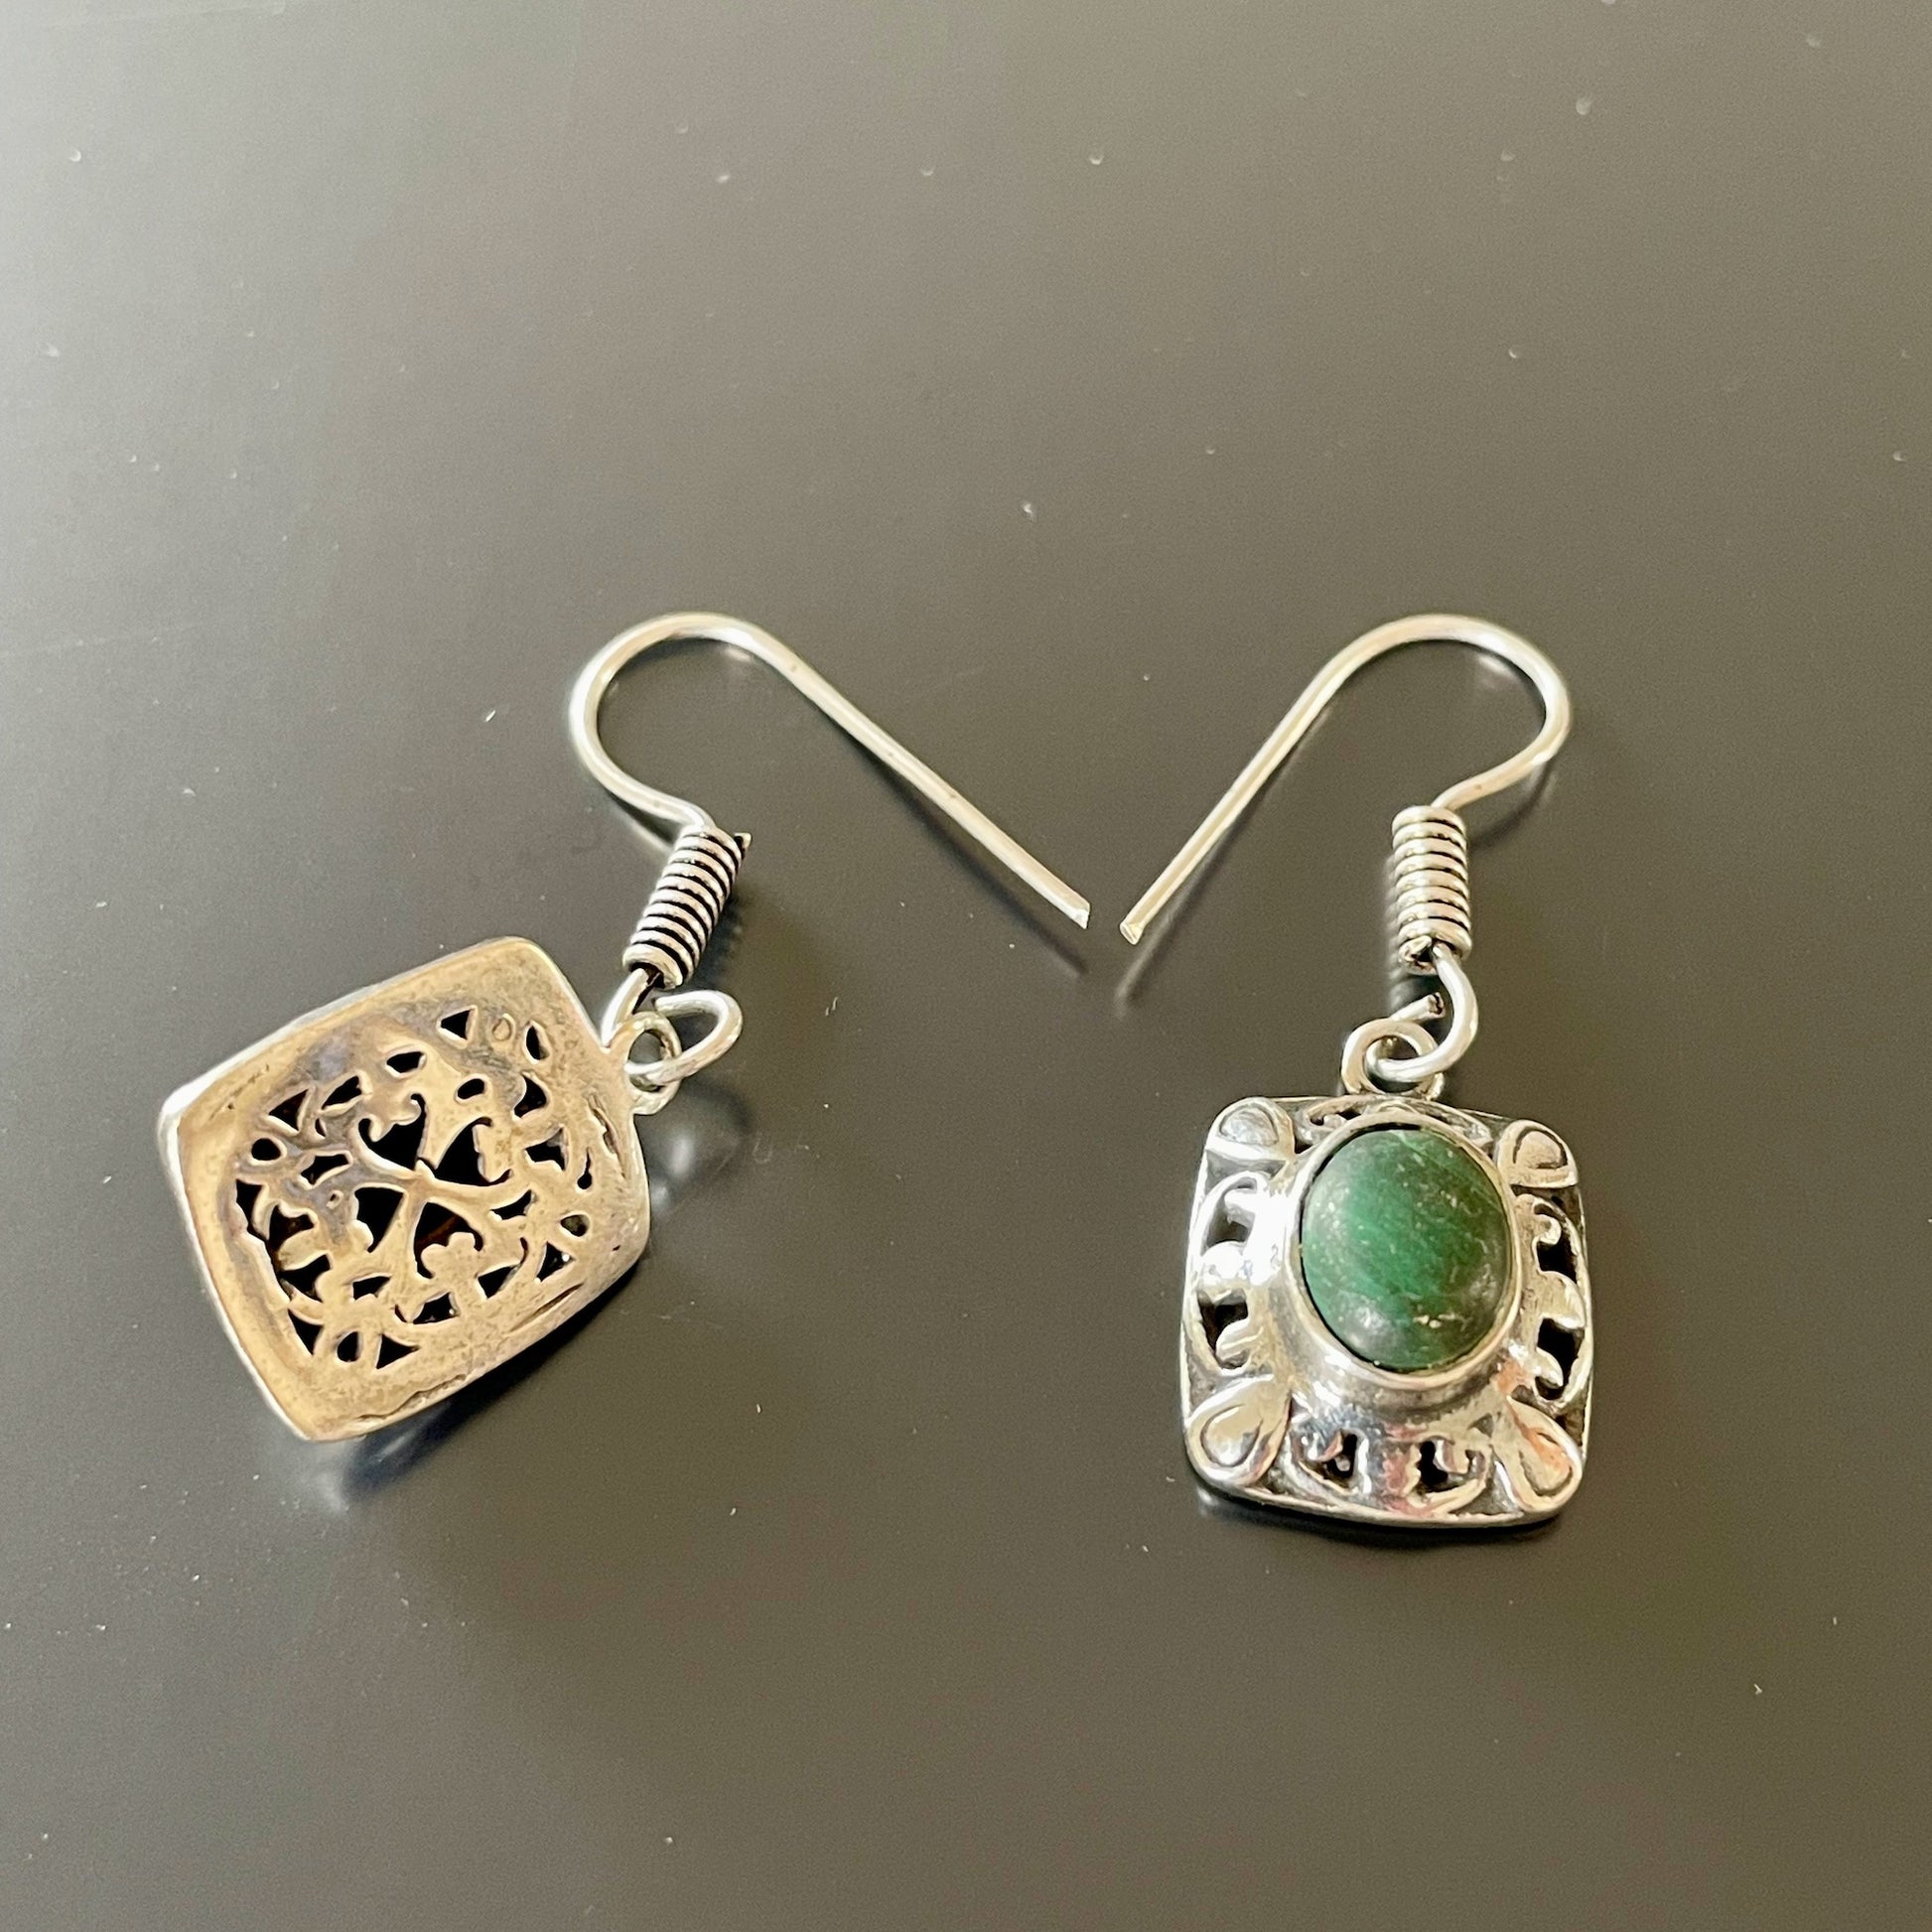 Fretwork Berber Silver Earrings with Oval green Stones back